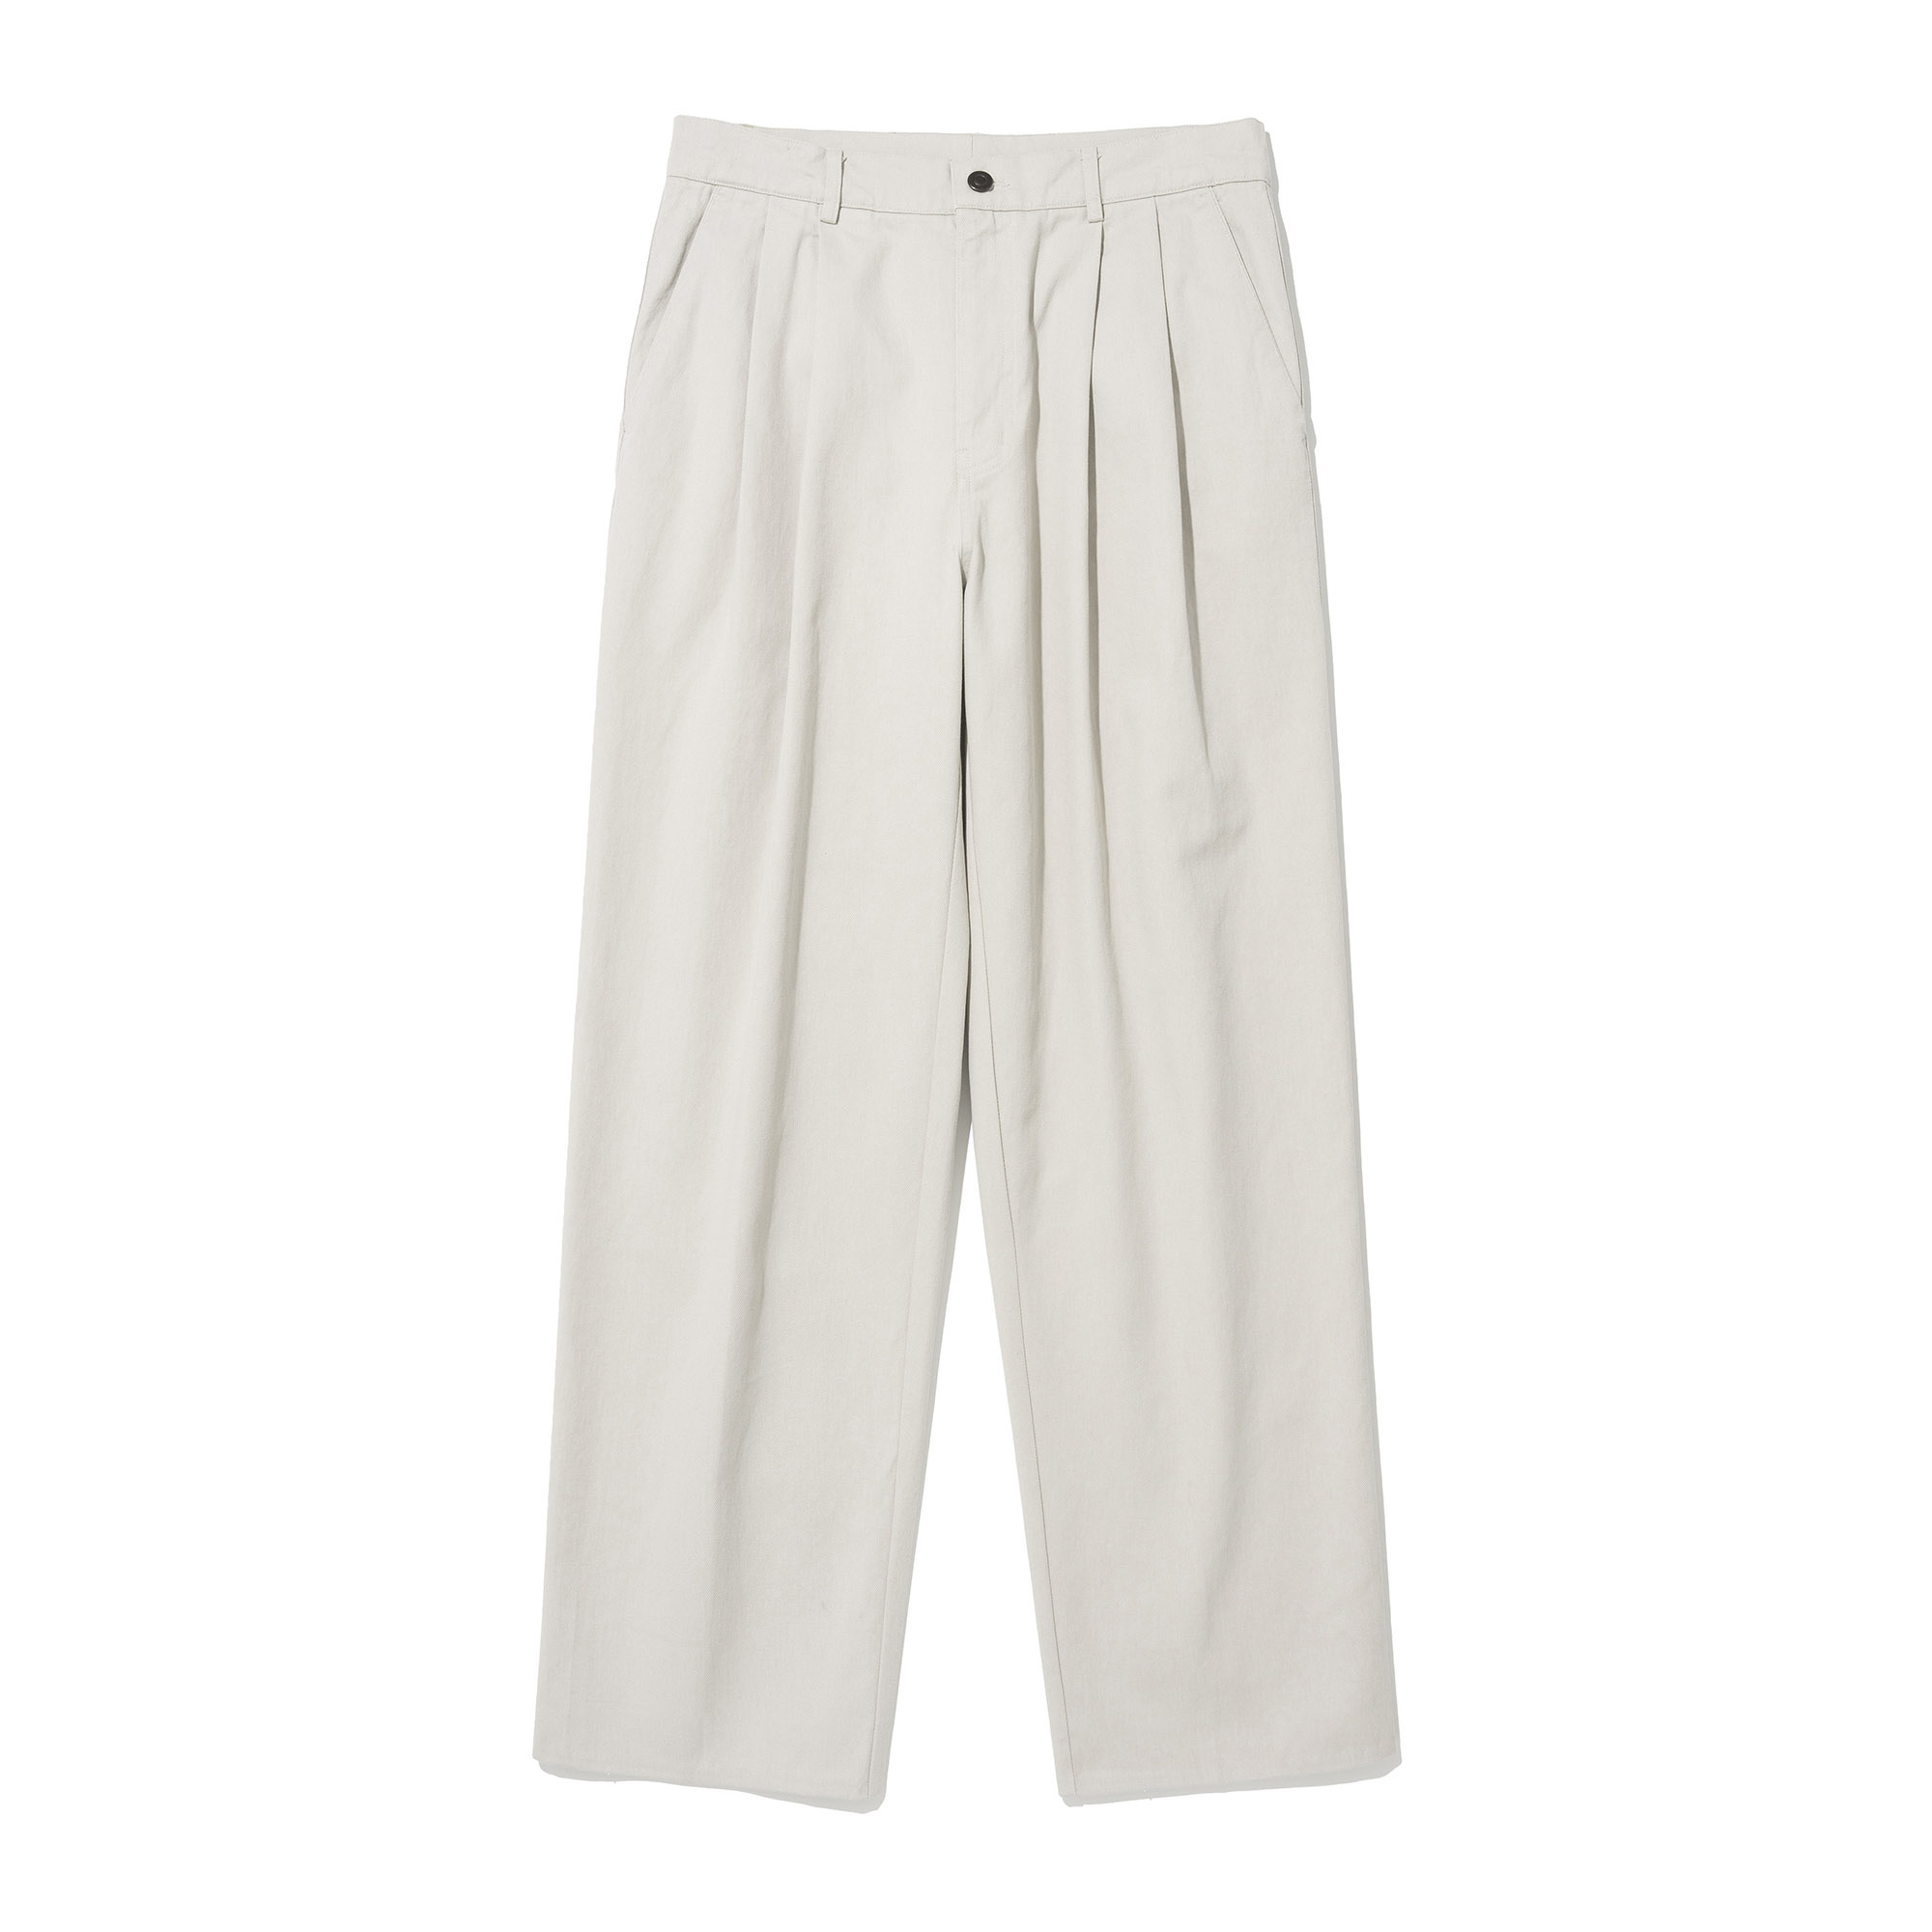 [COMPULSORY LINE] FRONT TWO TUCK DT CHINO PANTS #1(공식 온라인스토어 단독 발매)